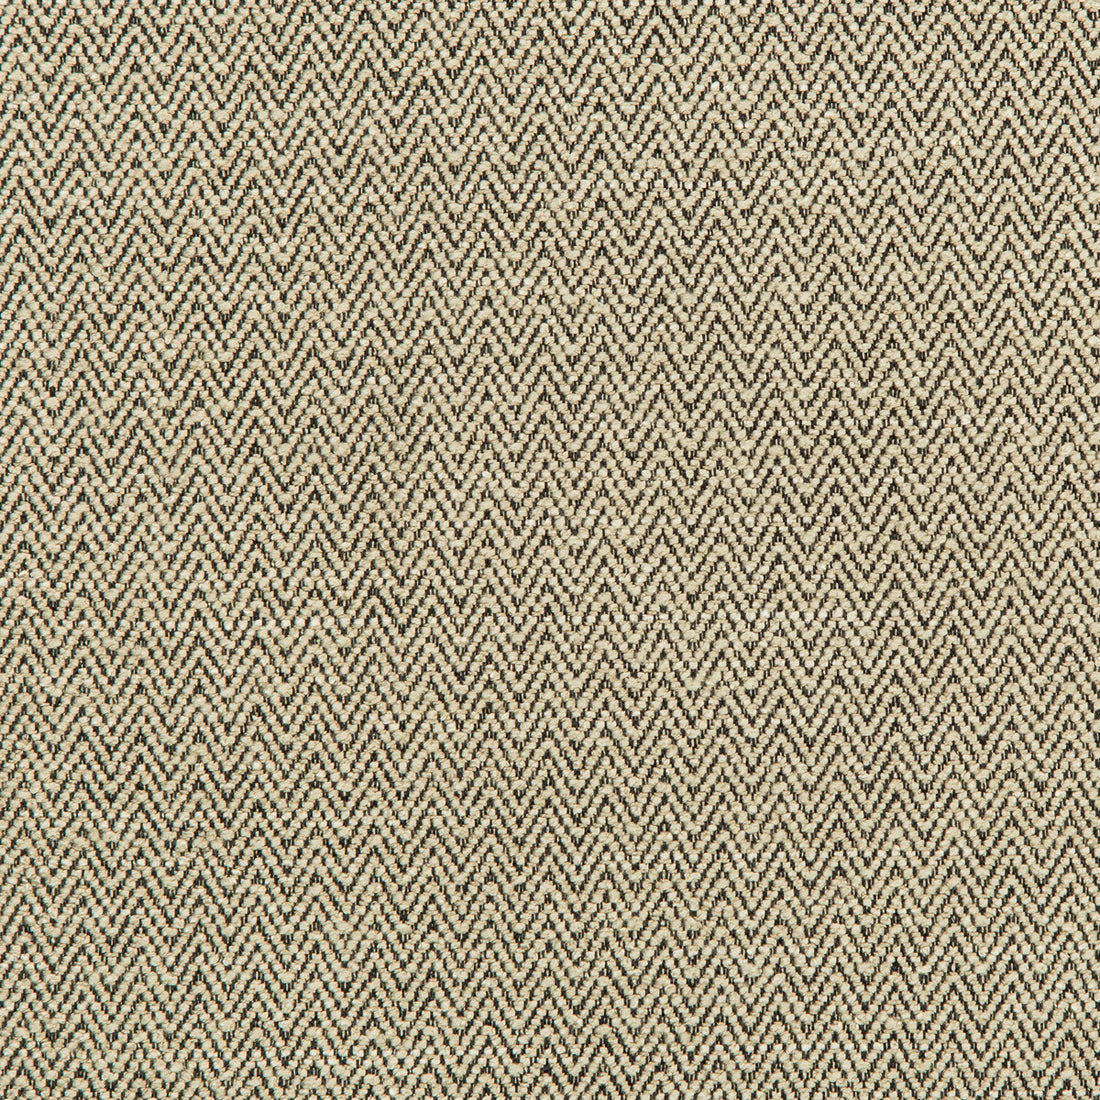 Mohican fabric in flax color - pattern 35883.816.0 - by Kravet Contract in the Gis Crypton collection